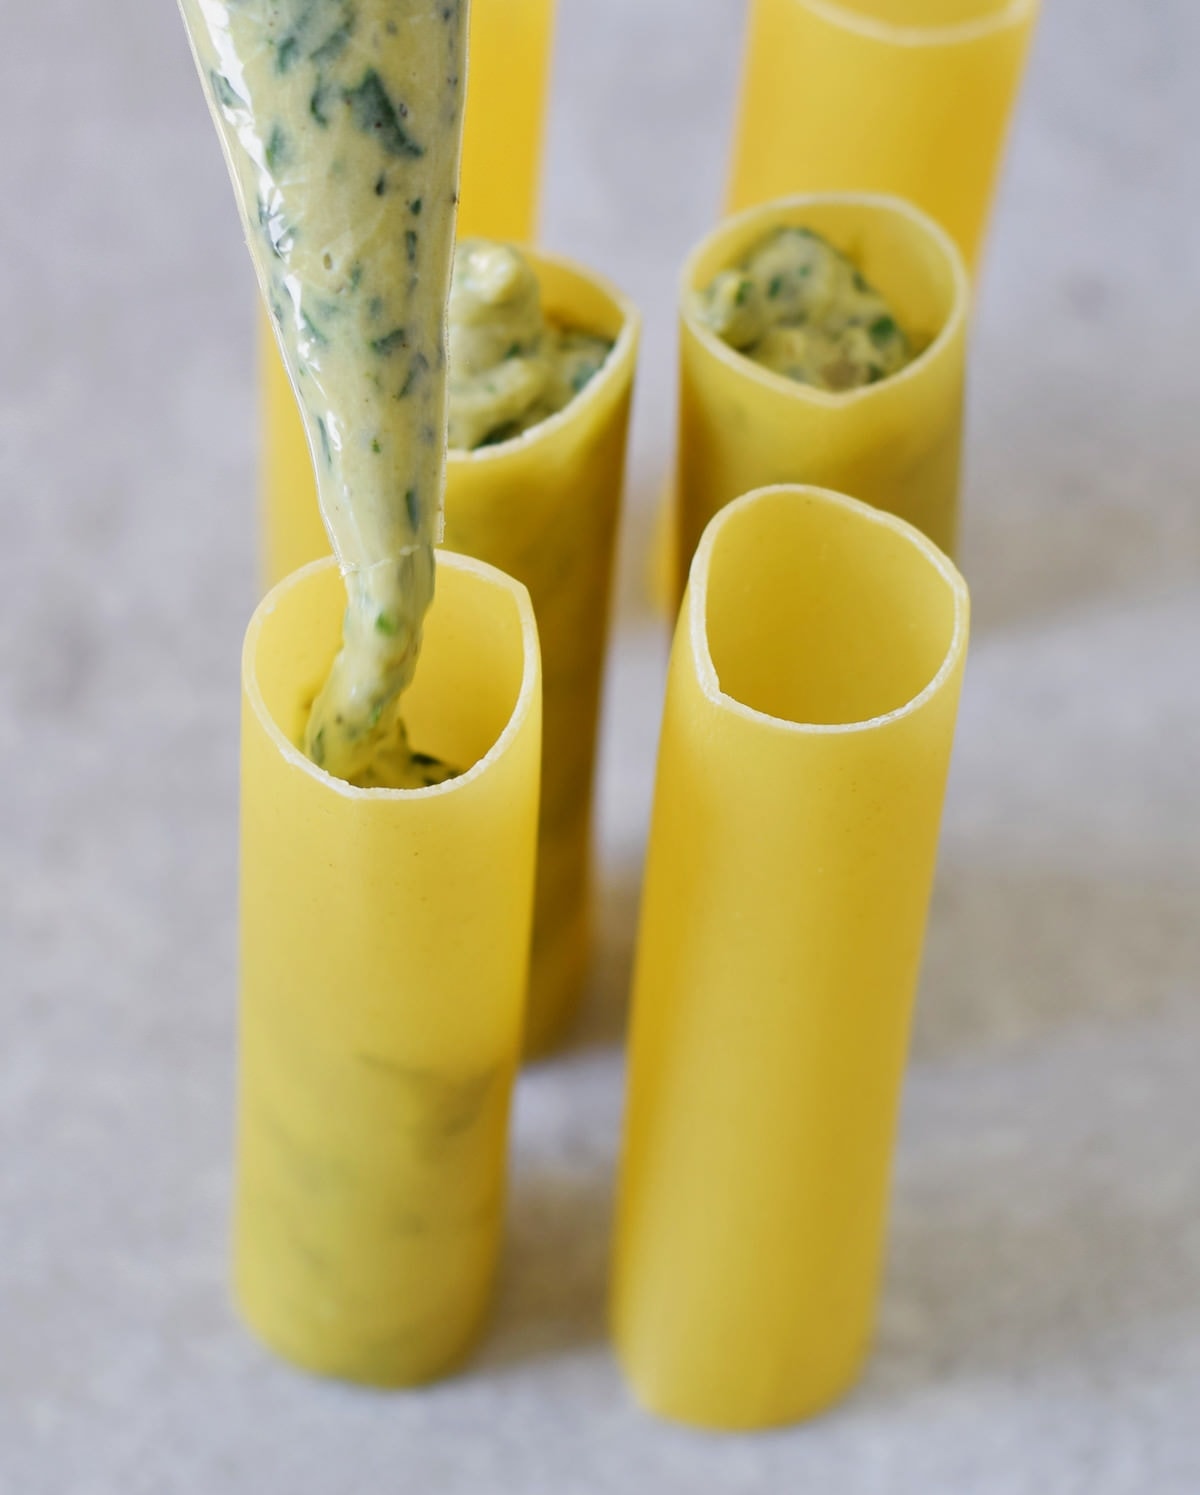 filling cannelloni tubes with ricotta and spinach mixture